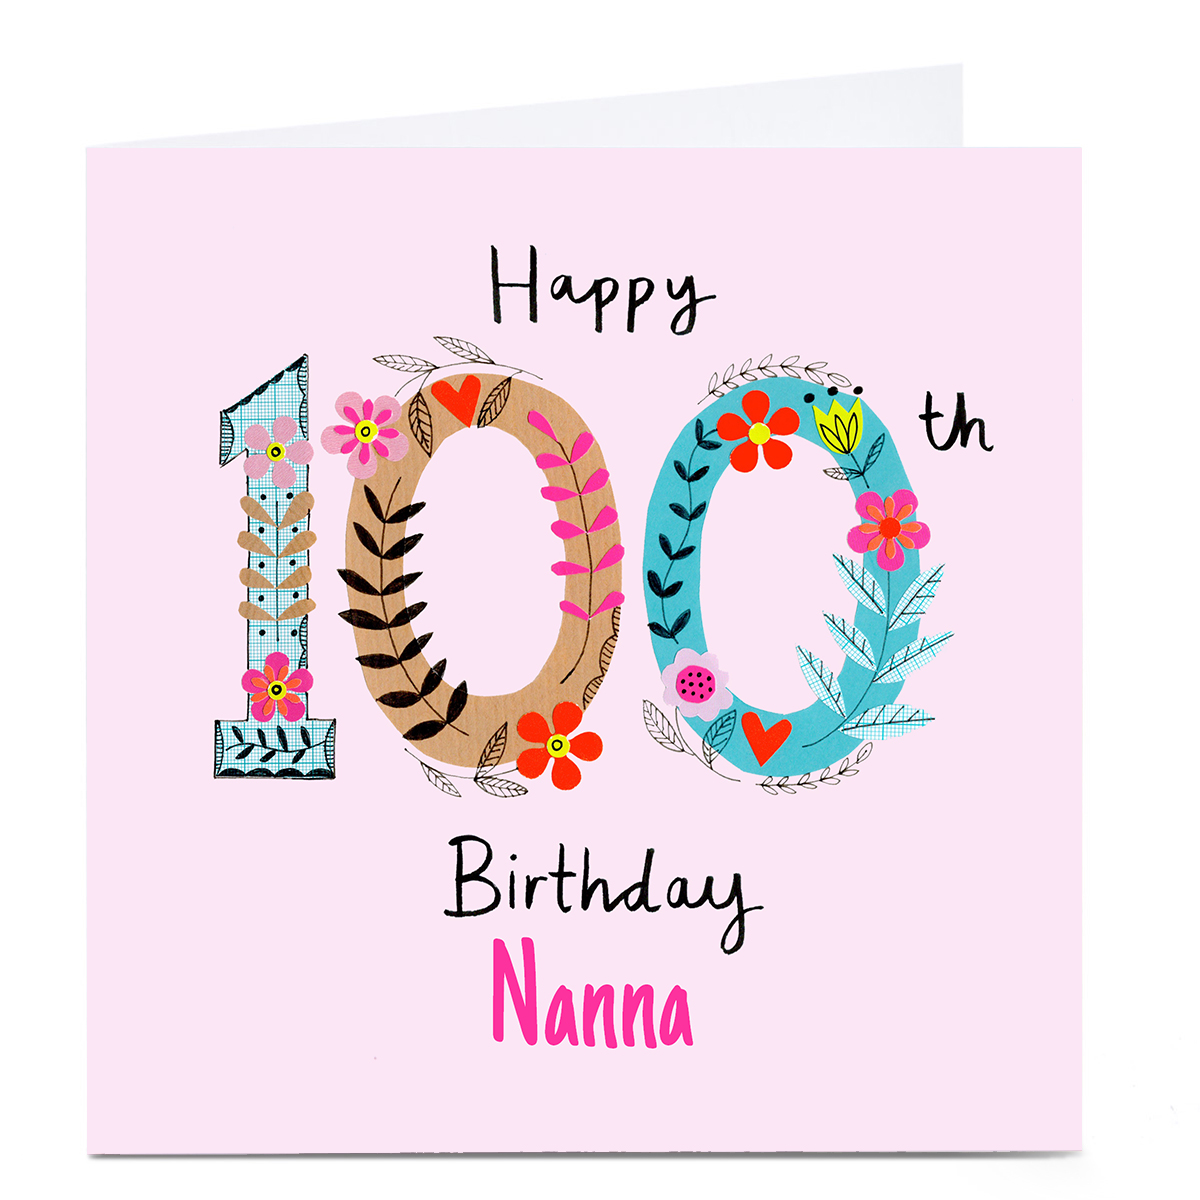 Buy Personalised Lindsay Loves To Draw 100th Birthday Card for GBP 3.29 ...